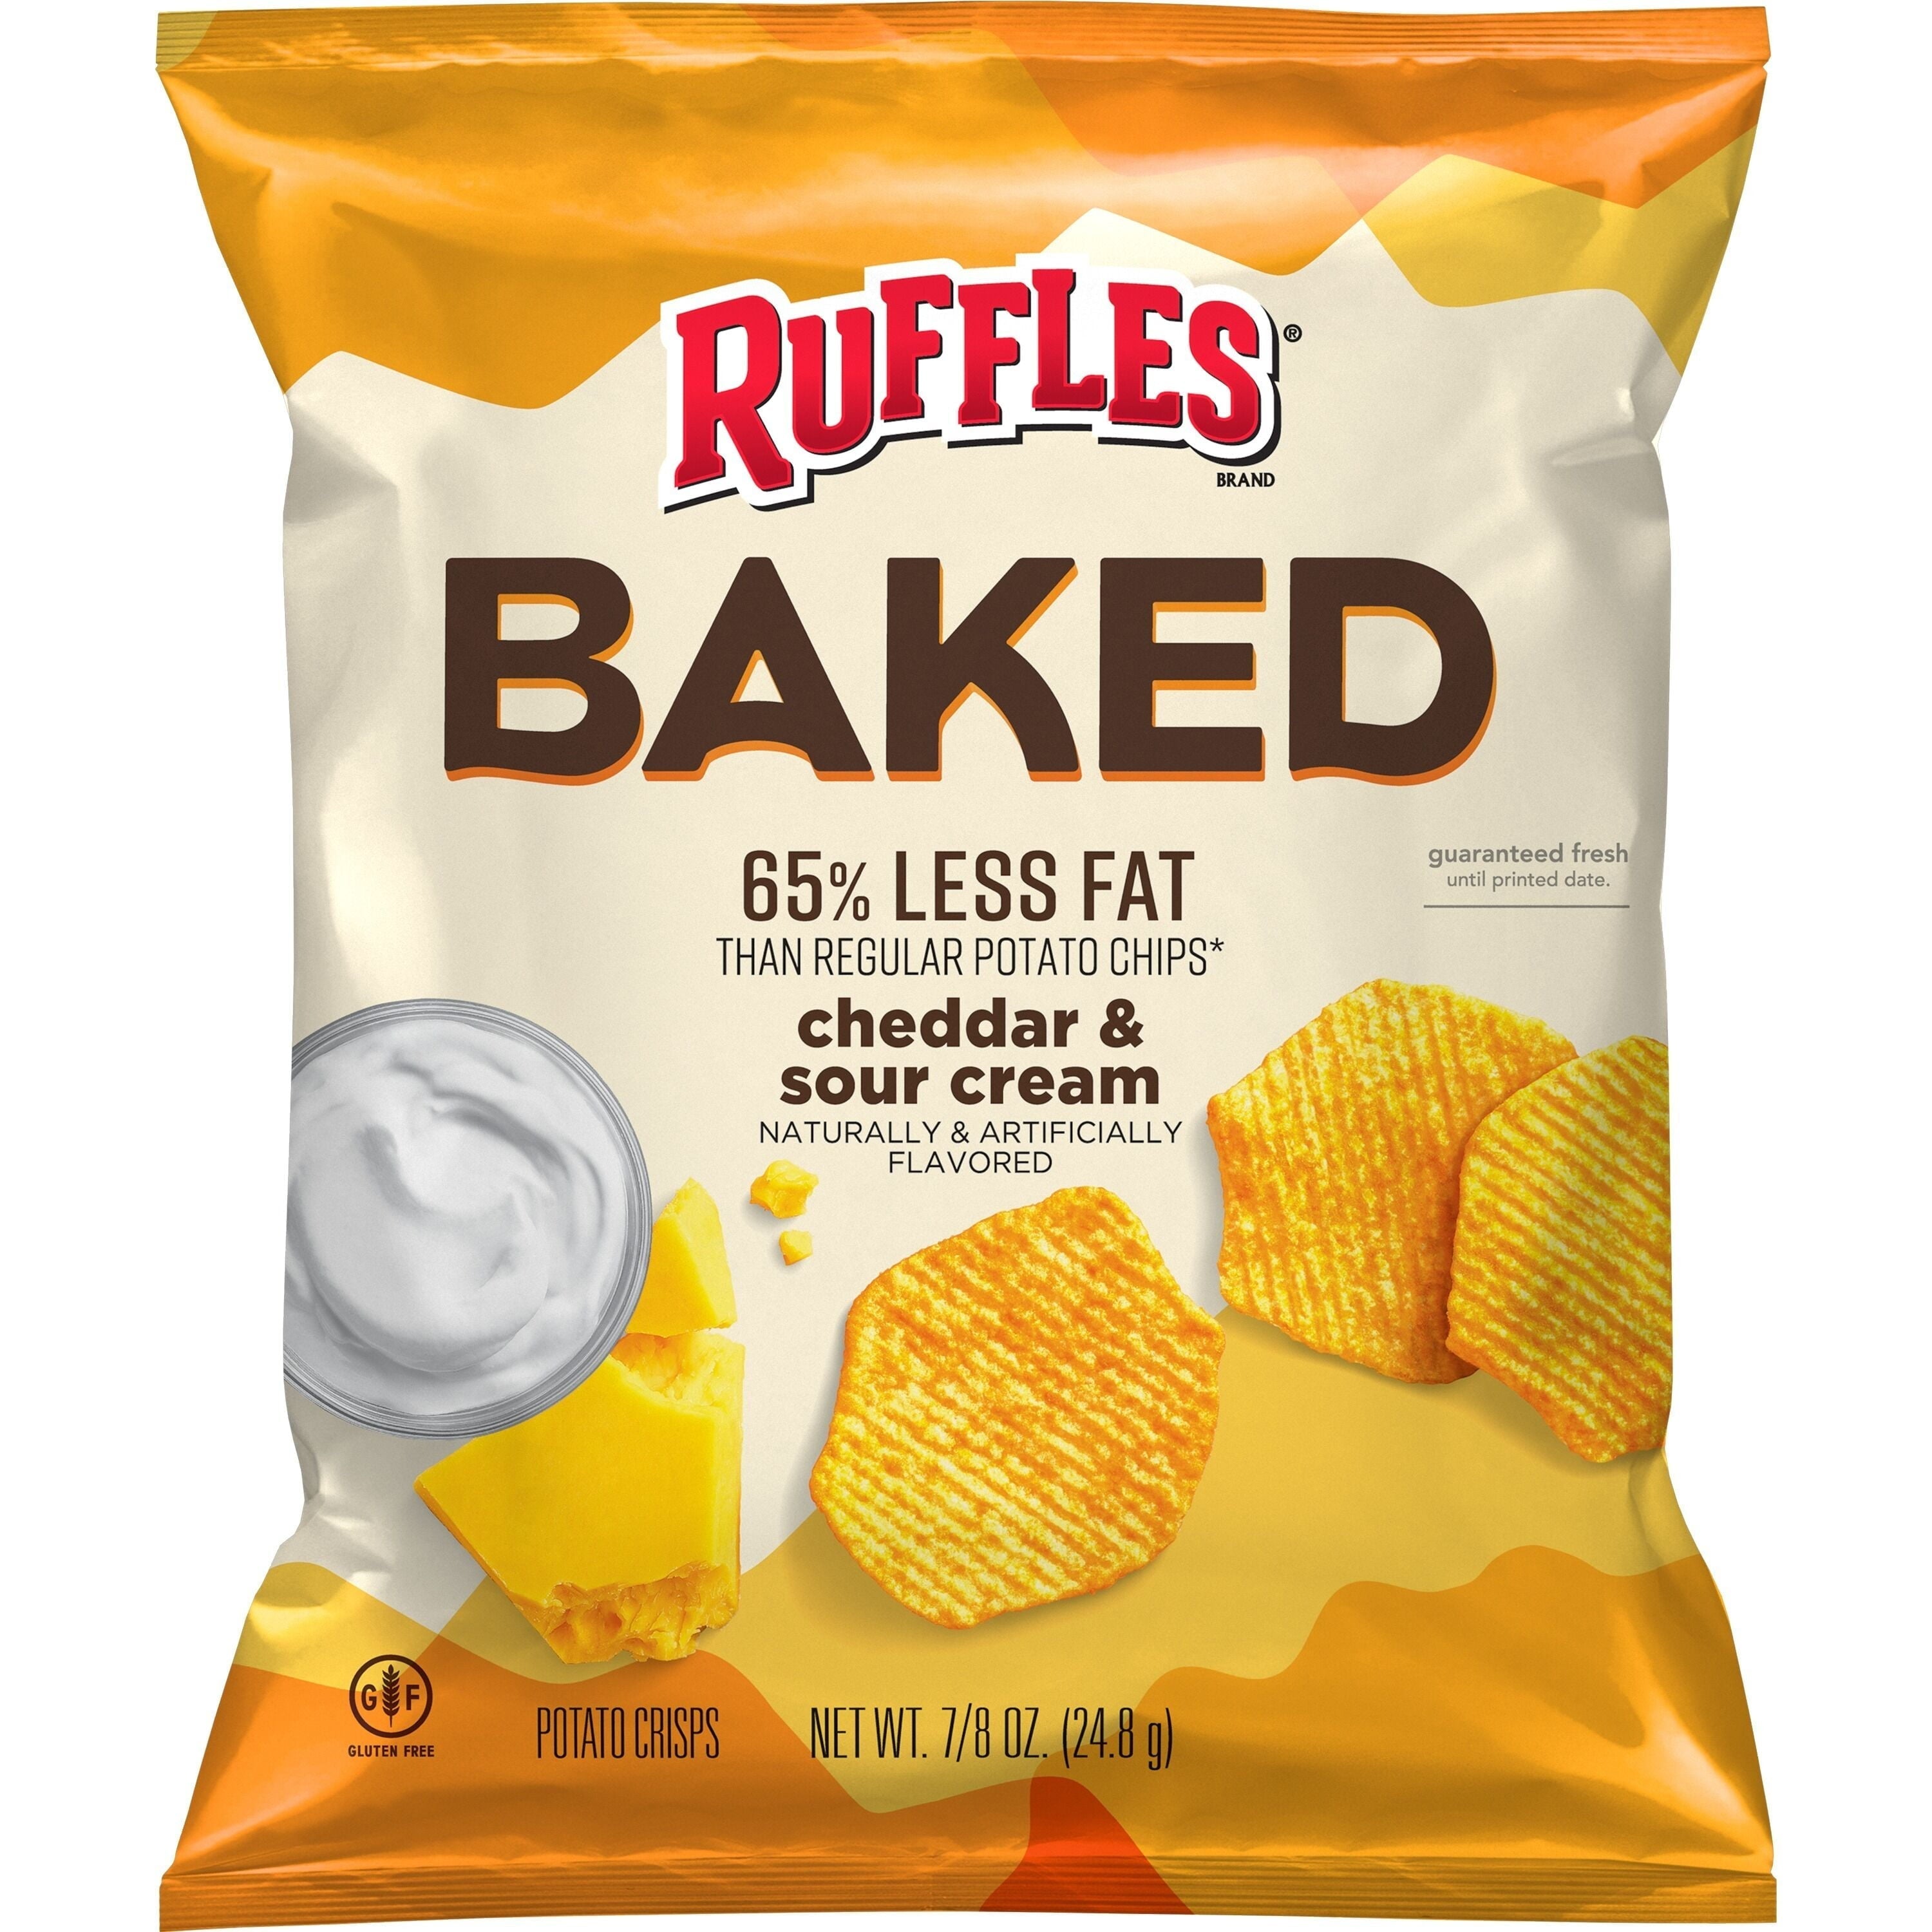 Wholesale prices with free shipping all over United States Frito-Lay Baked and Popped Mix Variety Pack, 18 Count - Steven Deals